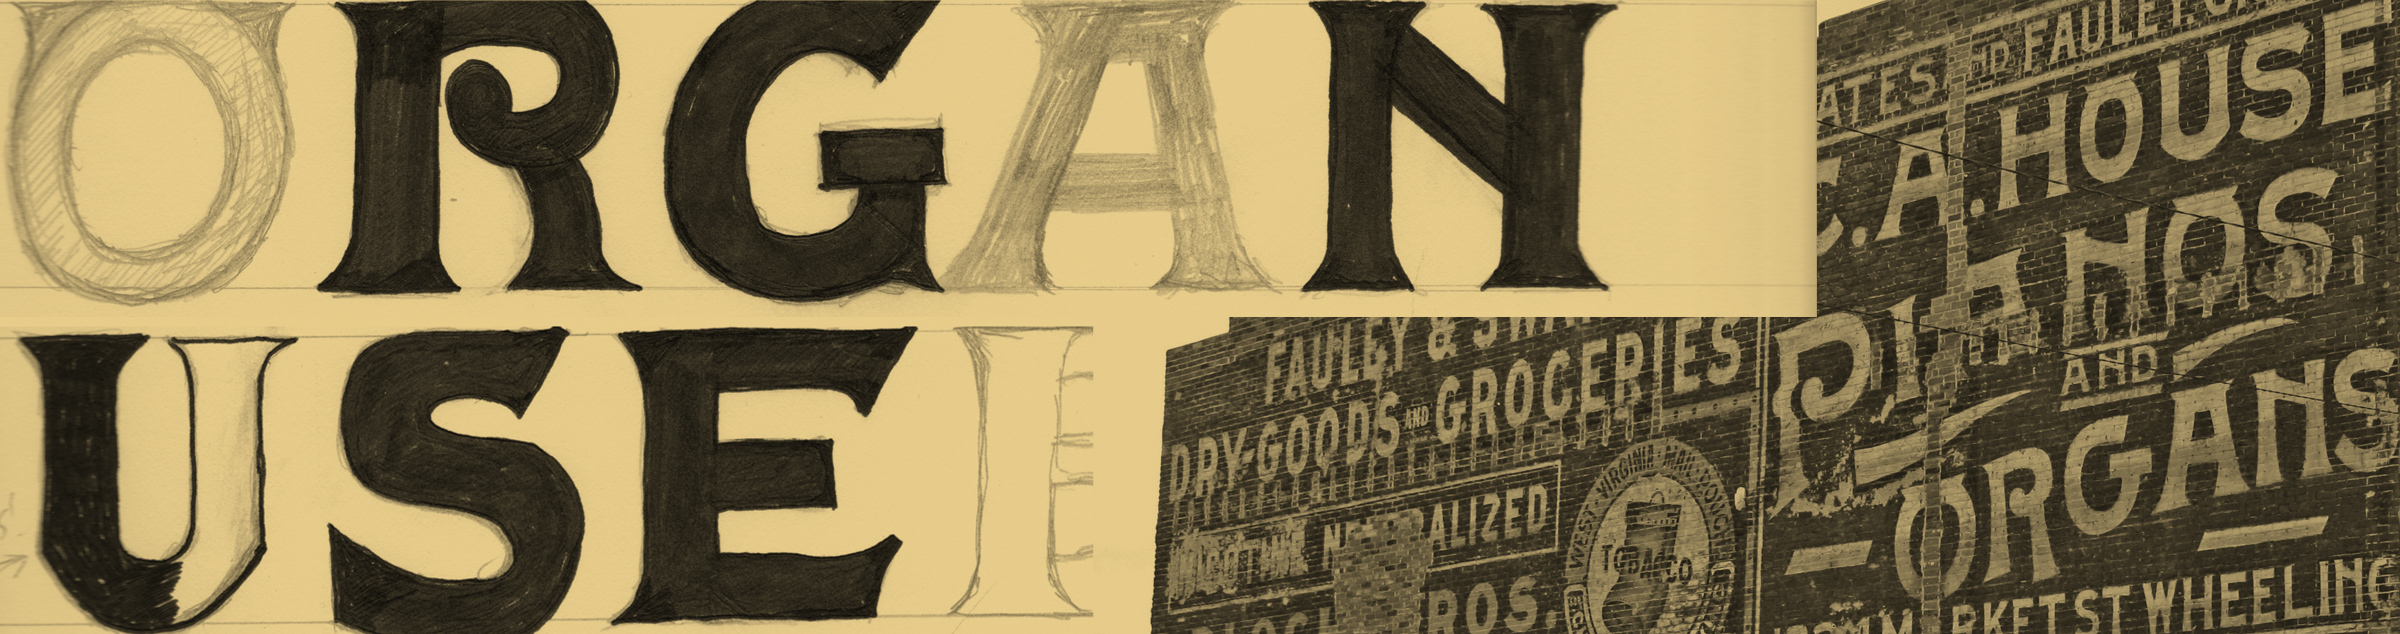 Creating a Typeface from an Old Source